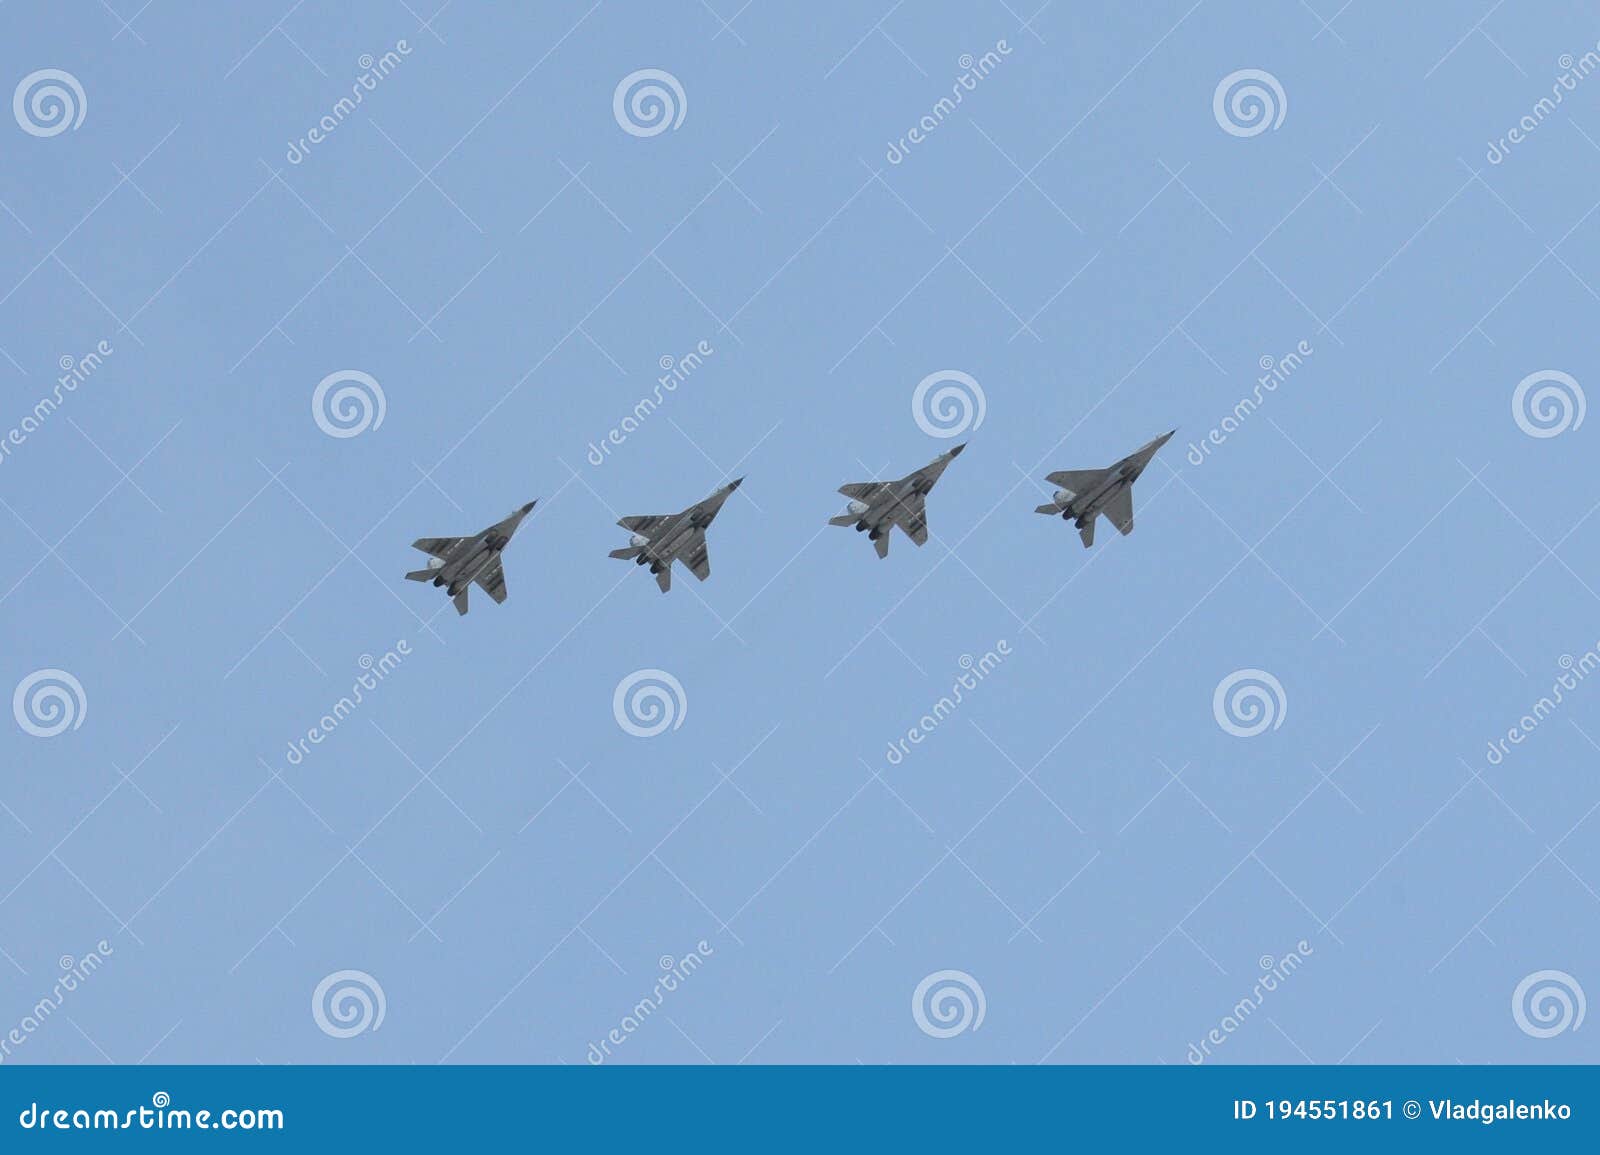 mig-31k interceptors in the sky over moscow during the dress rehearsal of the parade dedicated to the 75th anniversary of the vict